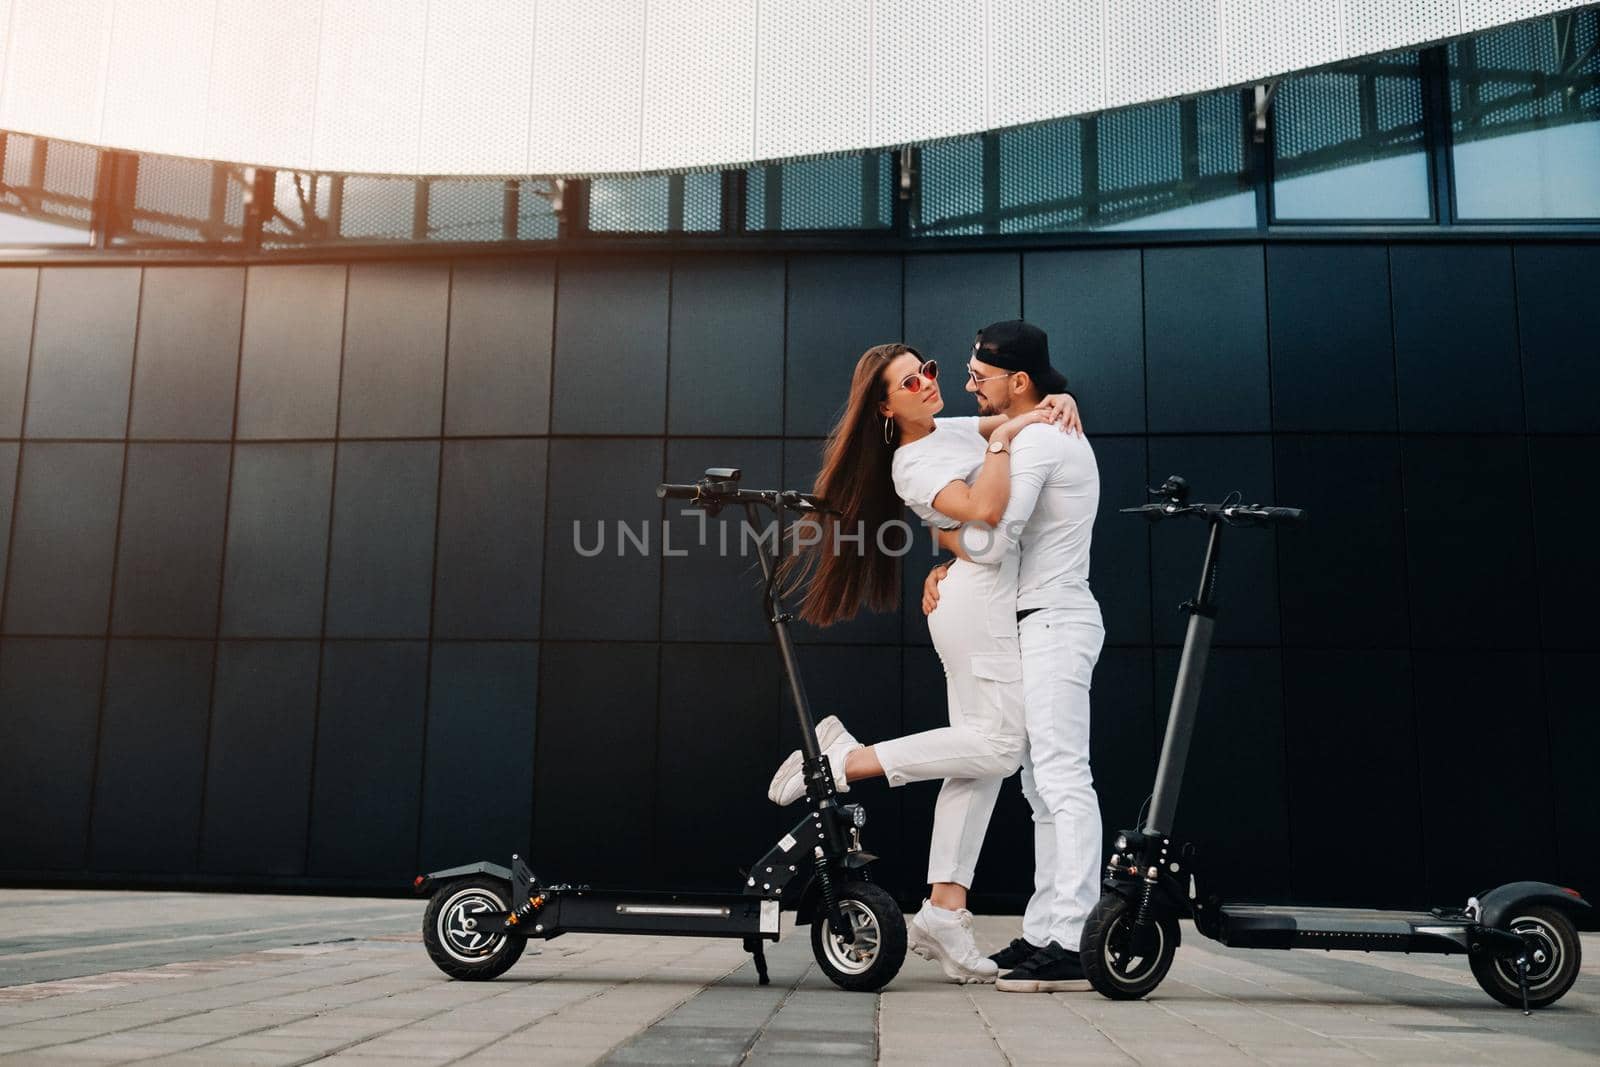 A couple on electric scooters embrace in the city, a couple in love on scooters by Lobachad